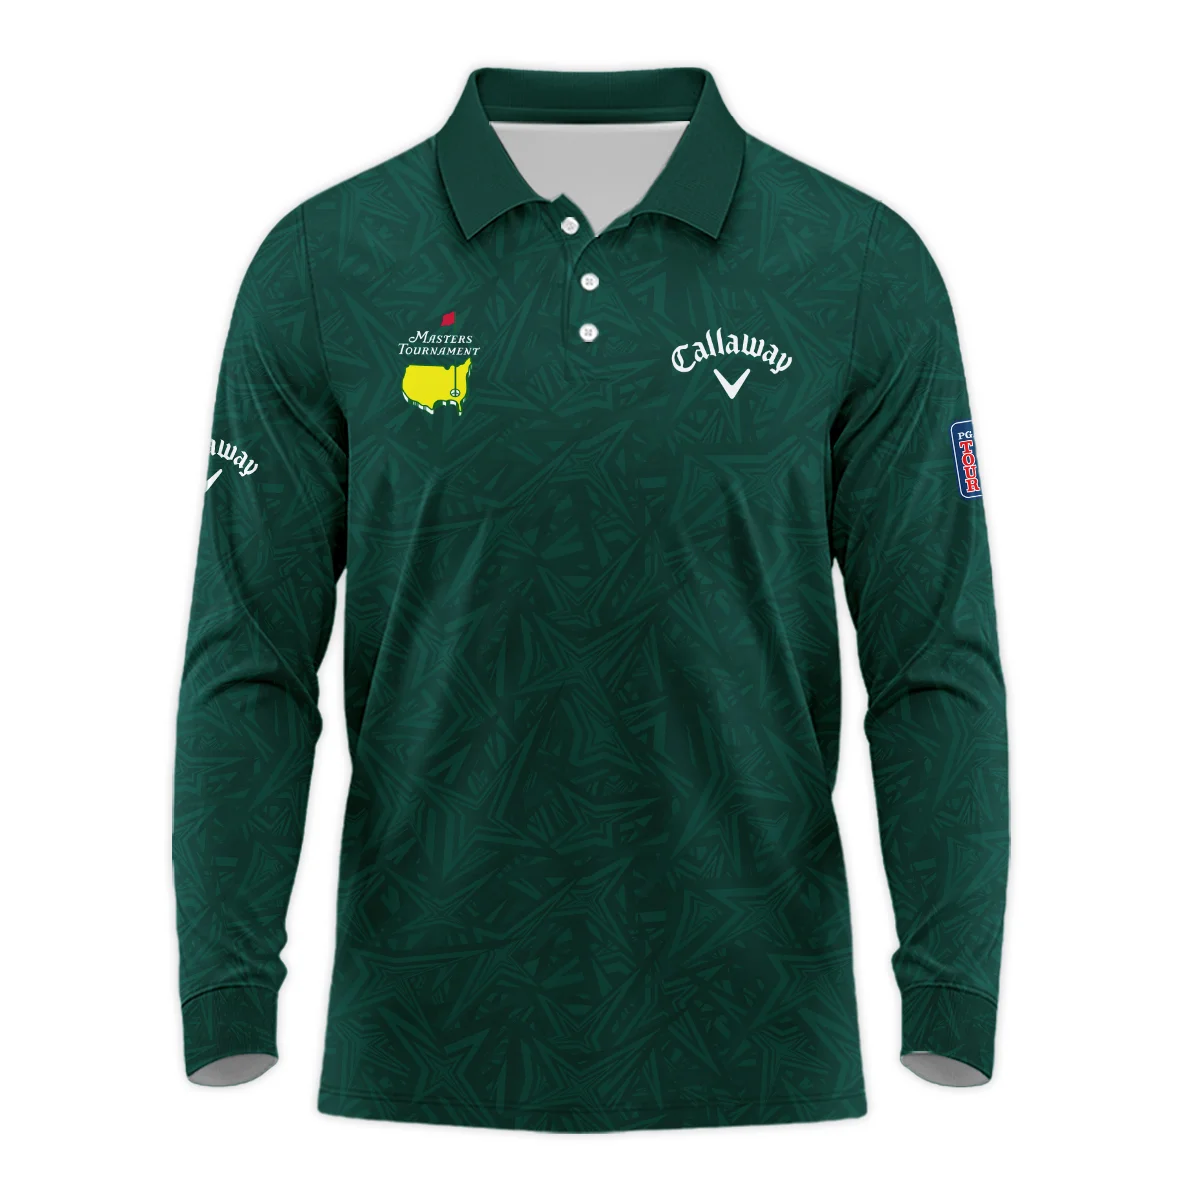 Stars Dark Green Abstract Sport Masters Tournament Callaway Vneck Long Polo Shirt Style Classic Long Polo Shirt For Men